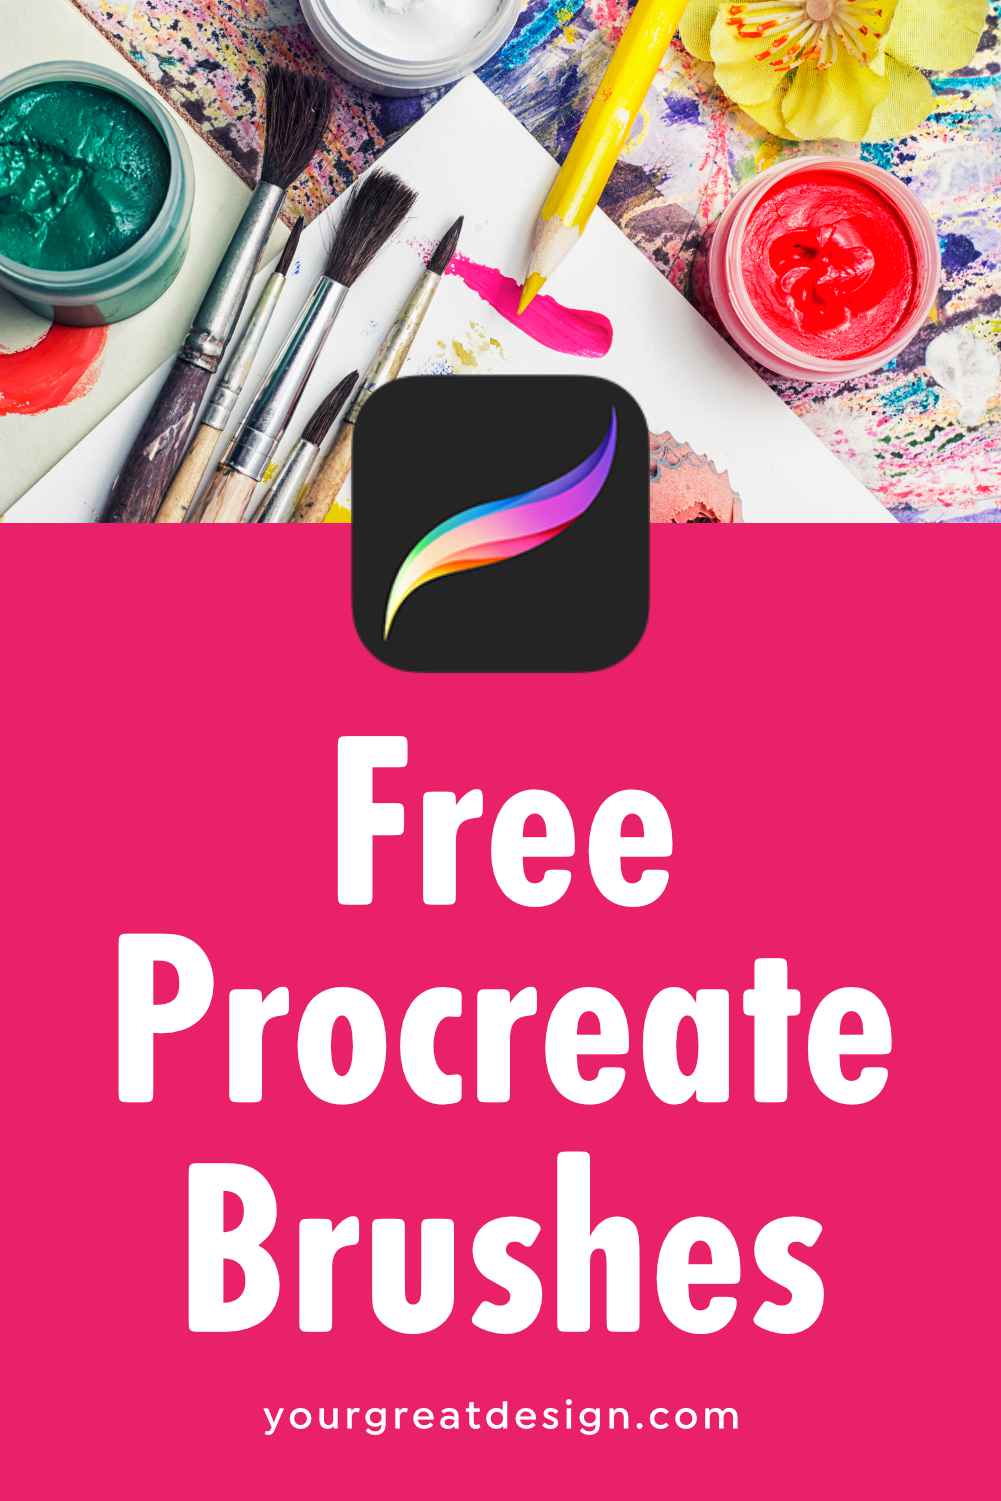 how to download procreate brushes for free